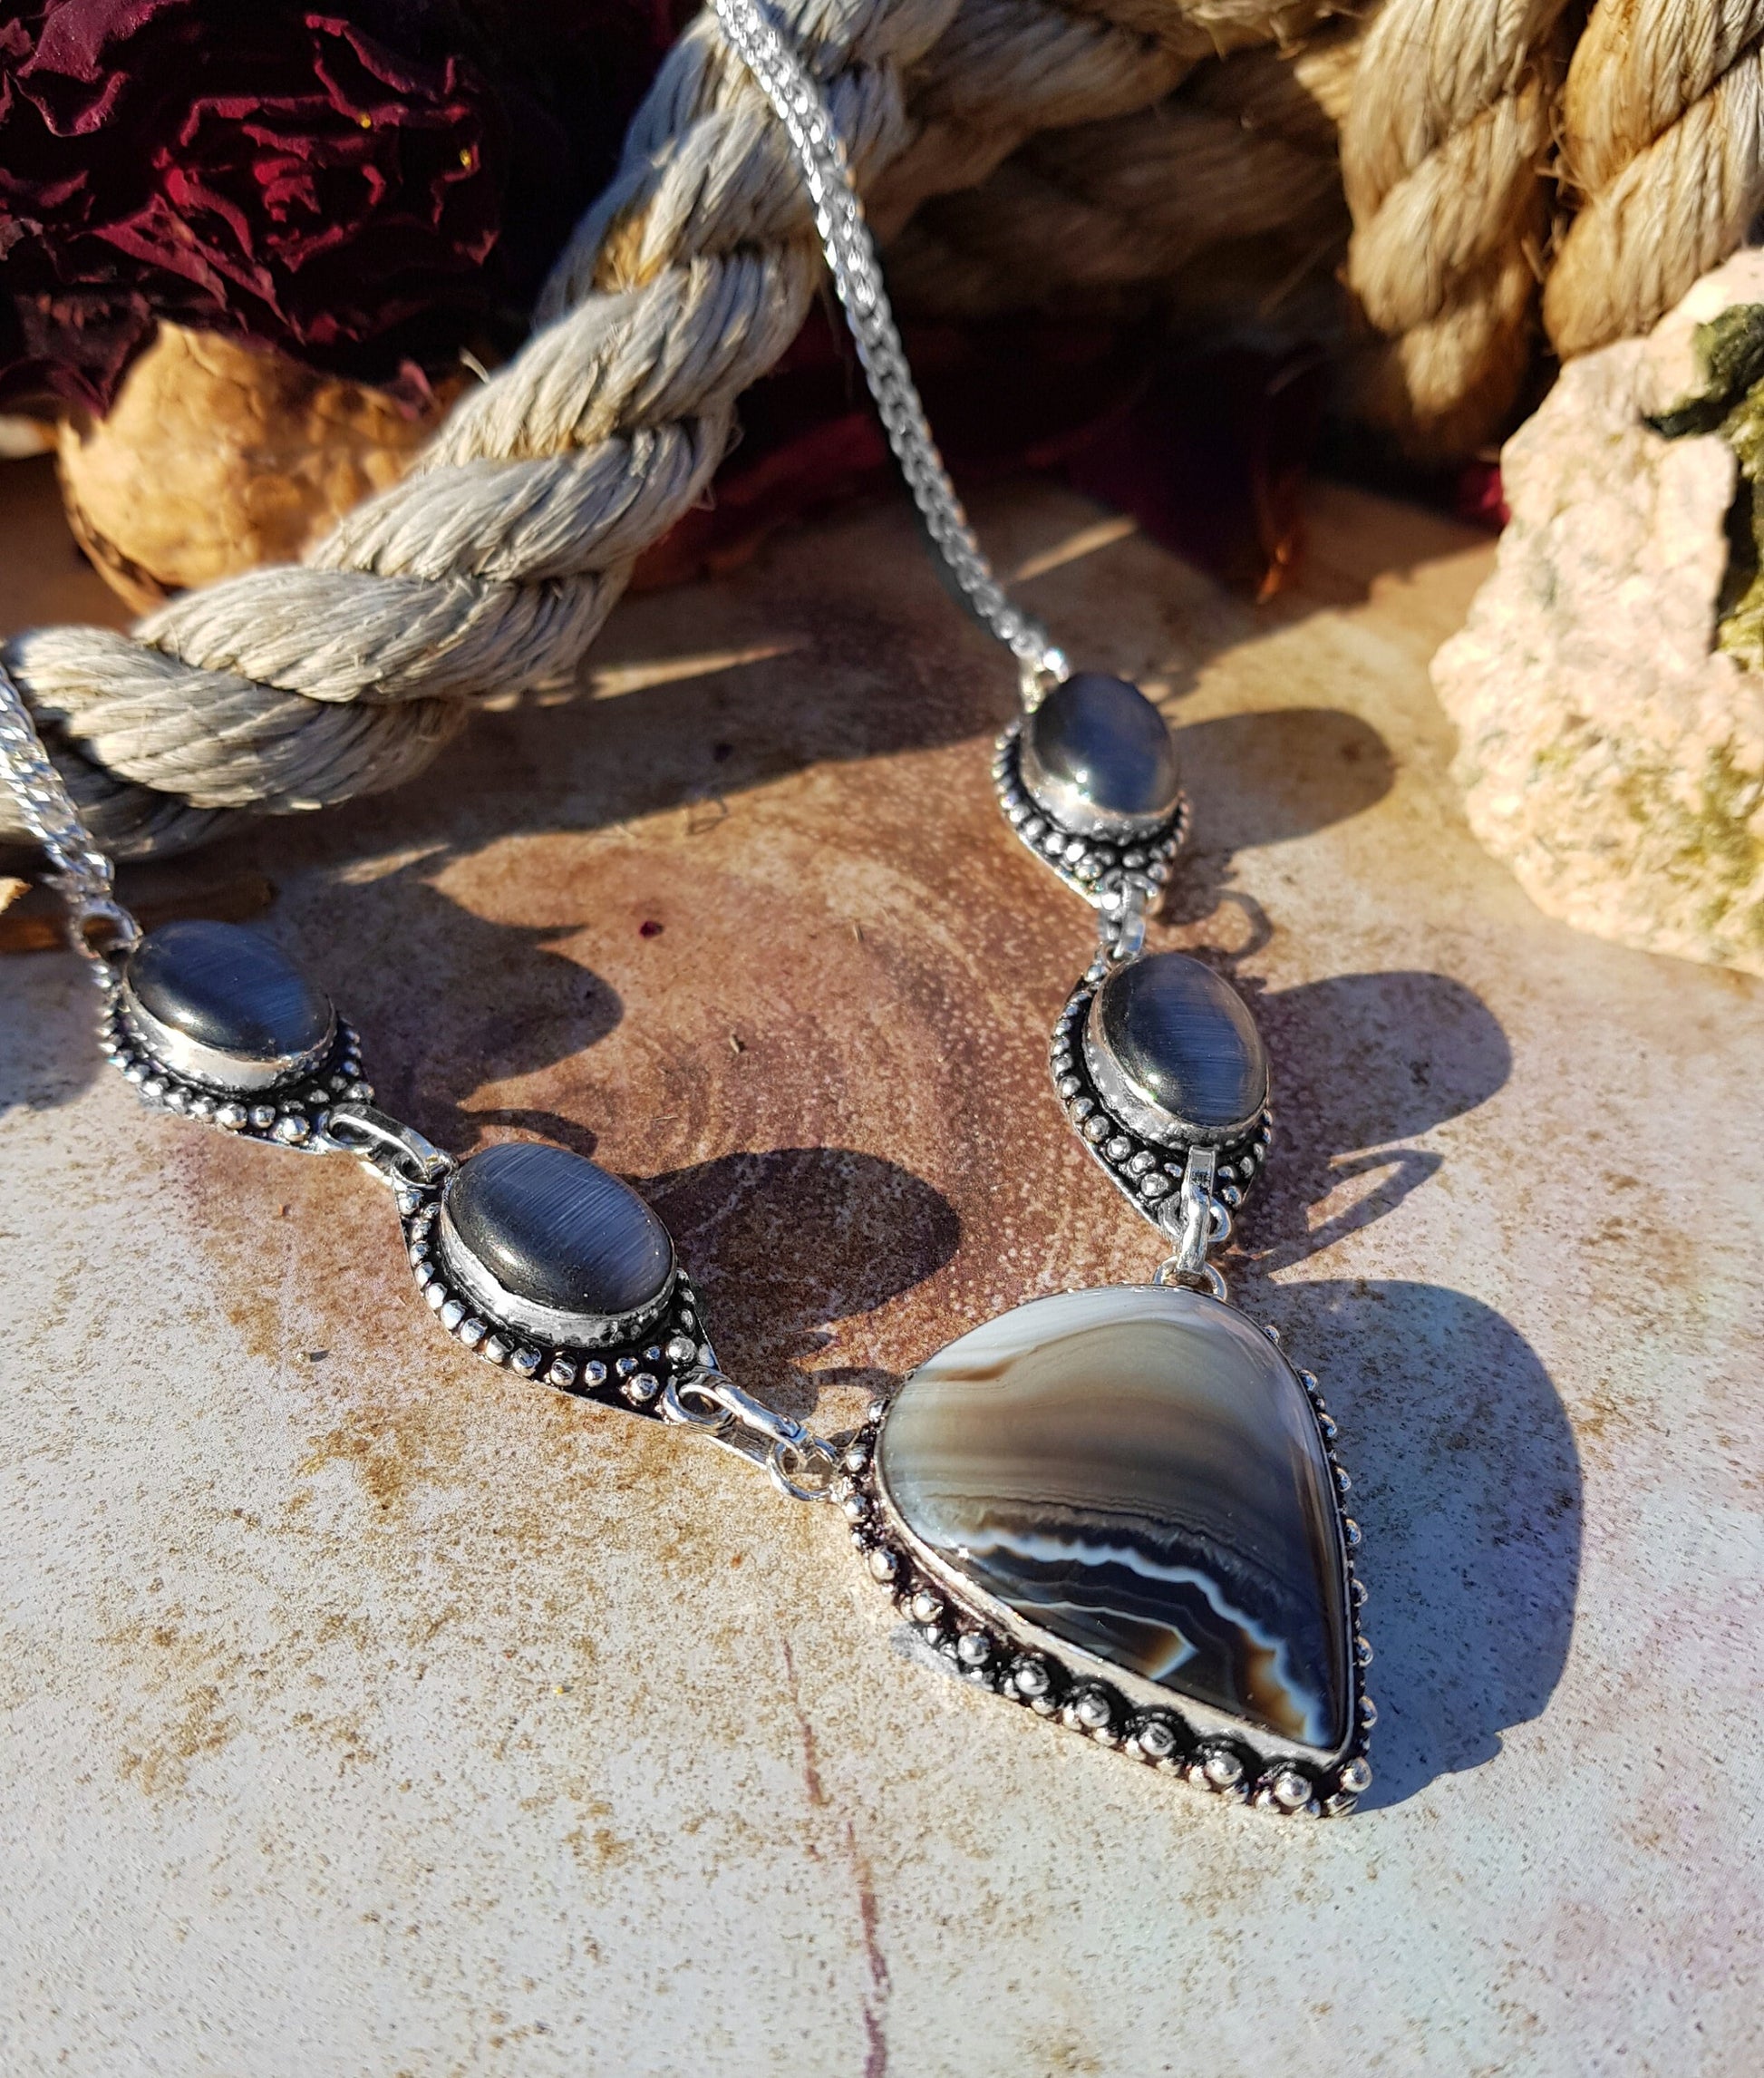 Botswana Agate And Hematite Statement Necklace In Sterling Silver, Multi Stone Necklace